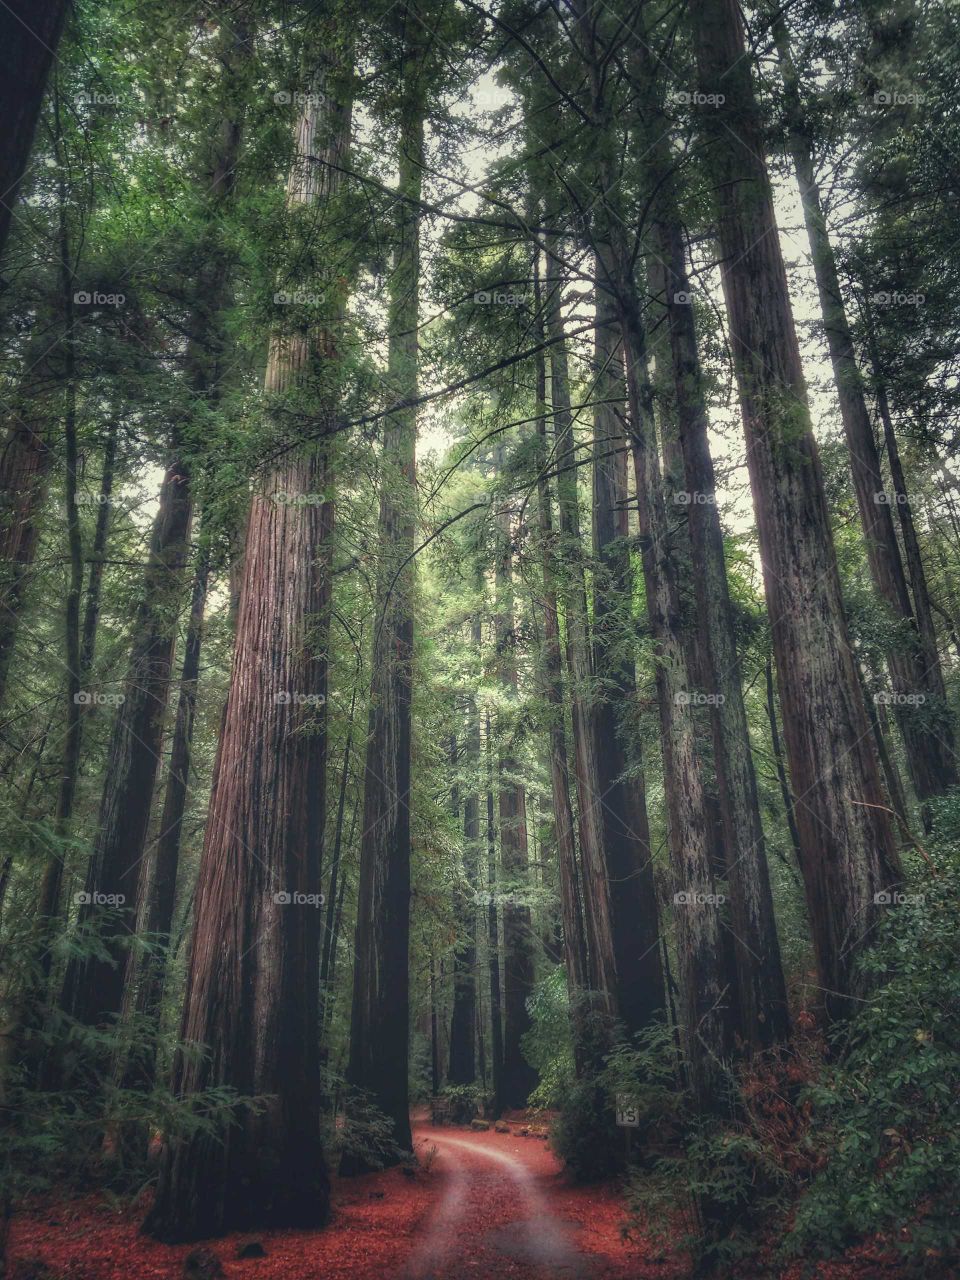 Visiting the Redwoods